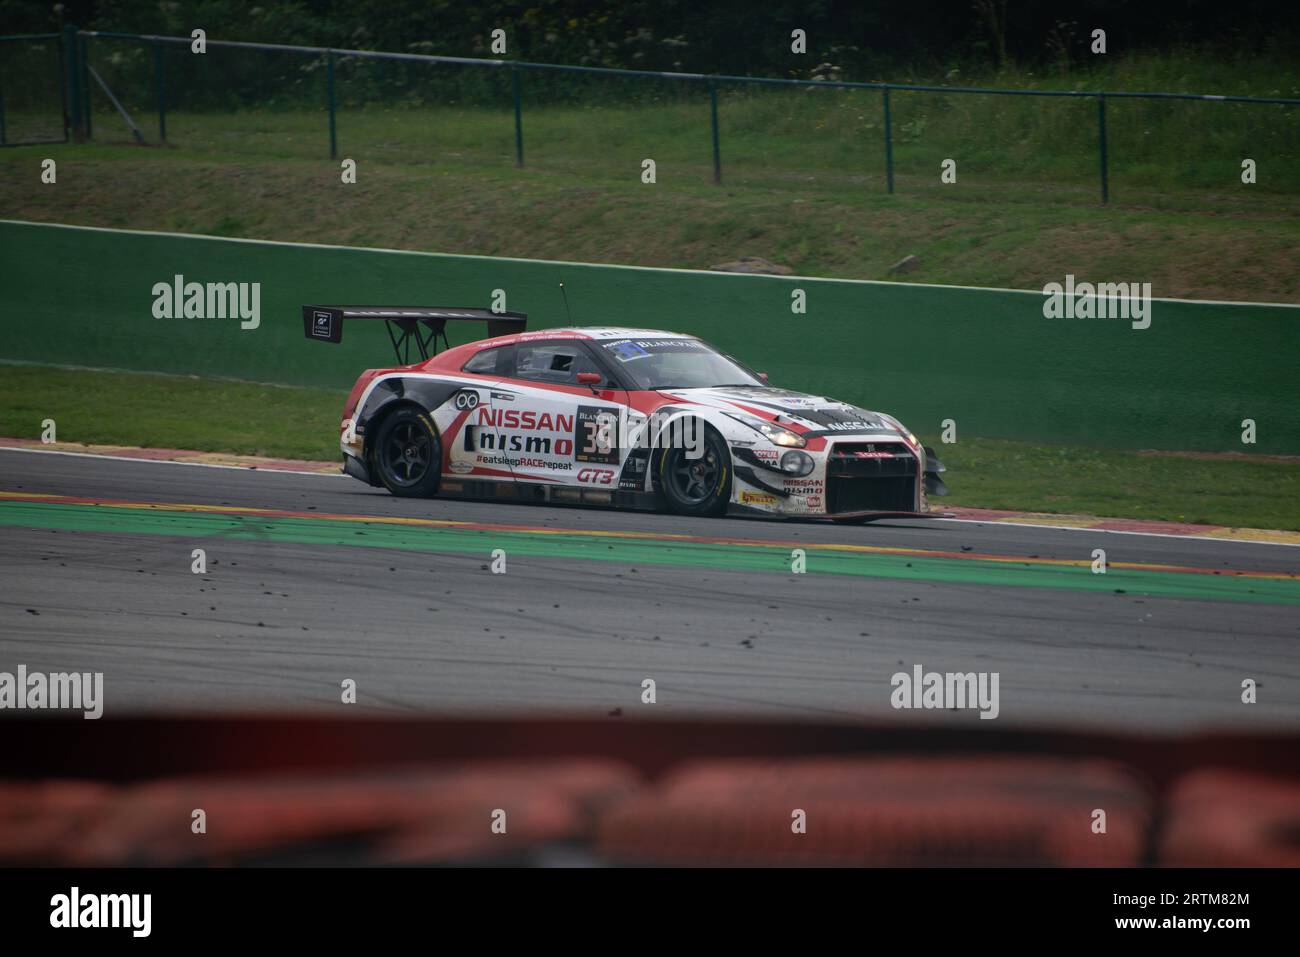 Photo Report of the 24 Hours of Spa Francorchamps with exclusive behind the scenes footage. Stock Photo